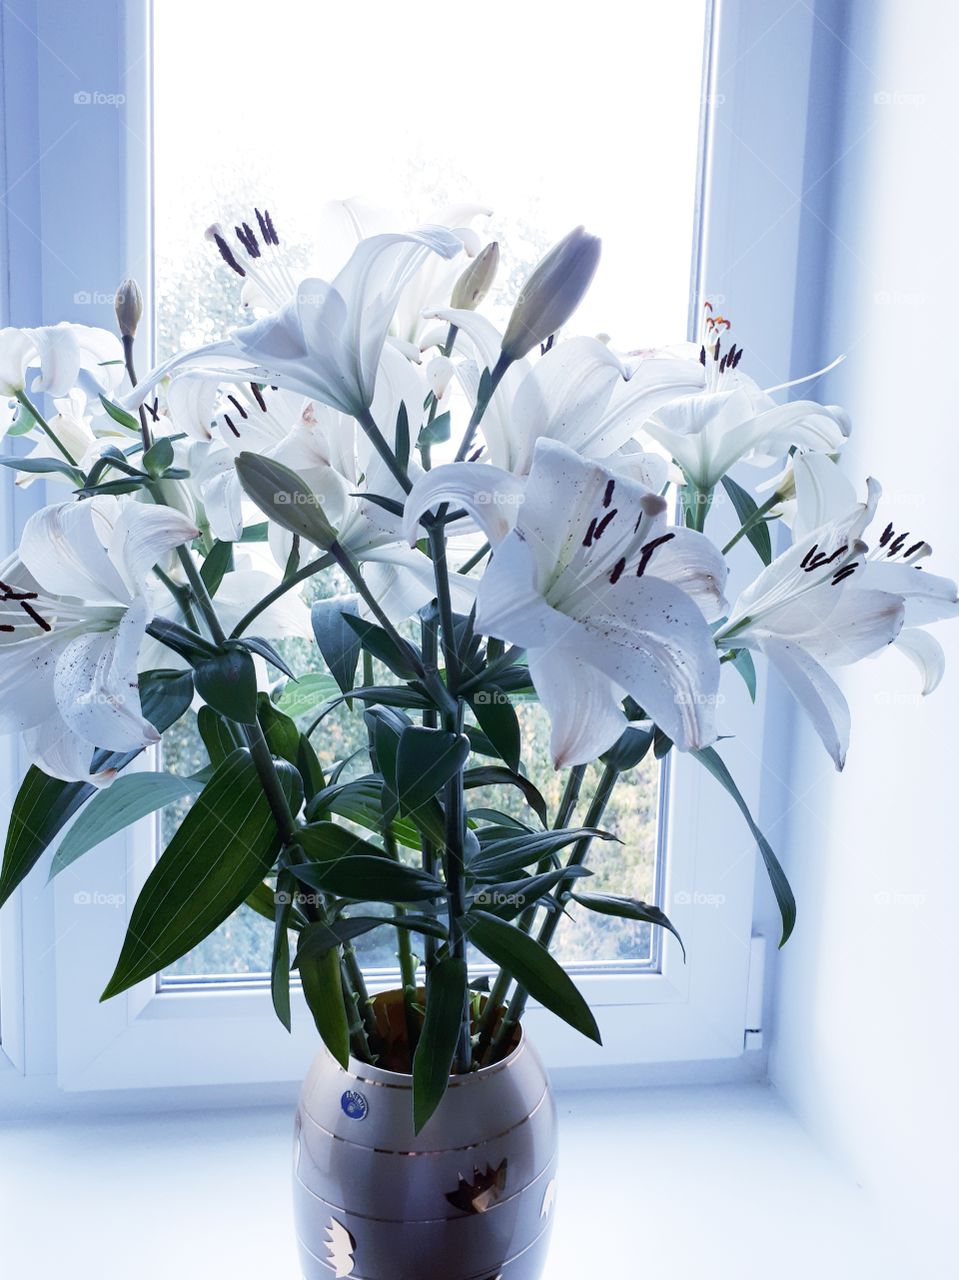 Luxurious bouquet of lilies with a vase